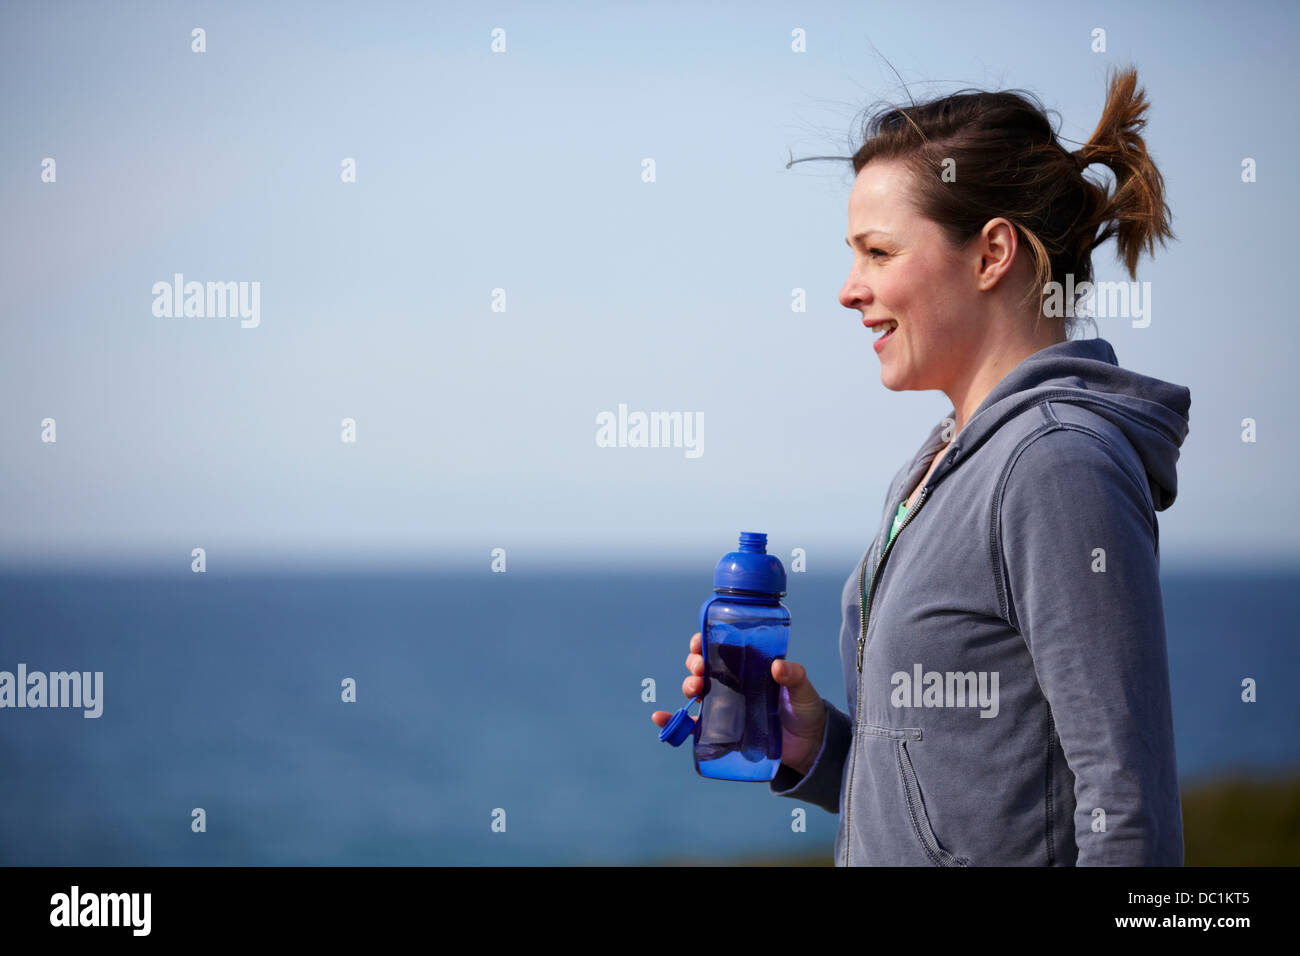 Young woman at coast taking exercise break Stock Photo